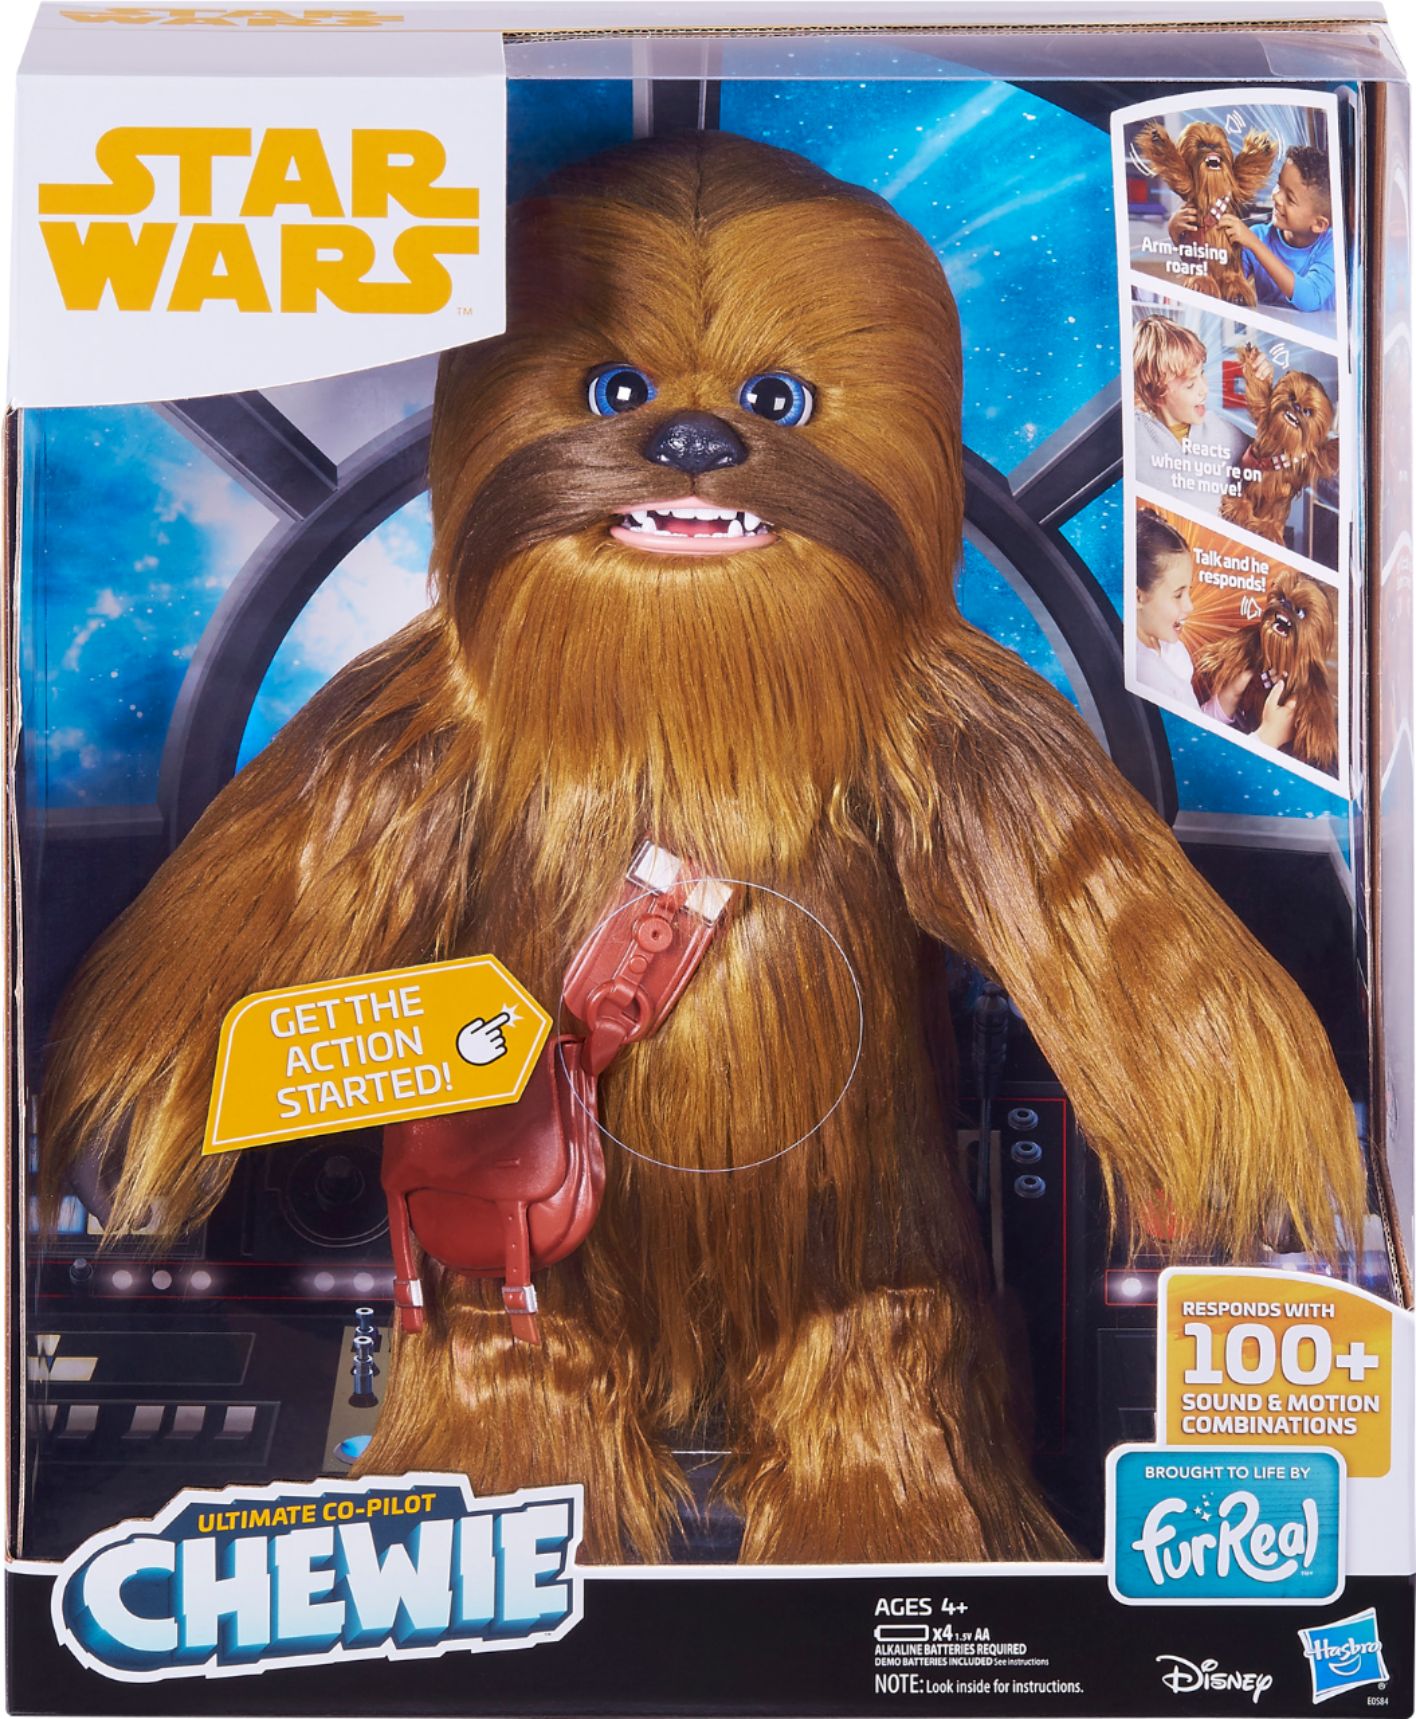 ULTIMATE CO-PILOT  CHEWIE BRAND NEW!! FUREAL STAR WARS